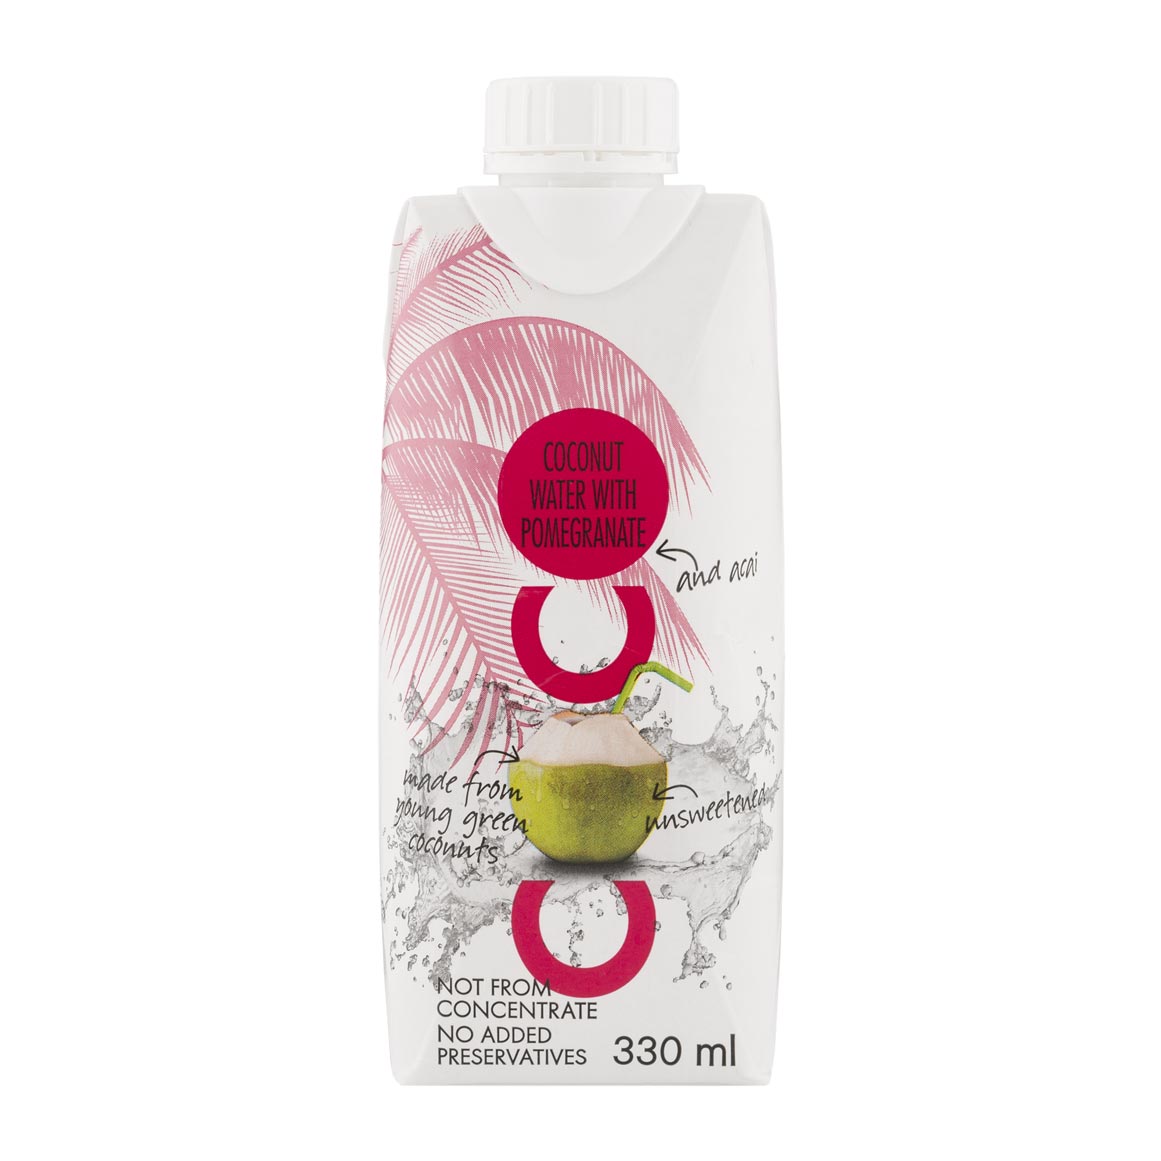 Coconut Water with Pomegranate & Acai Fruit Juice Blend 330 ml ...